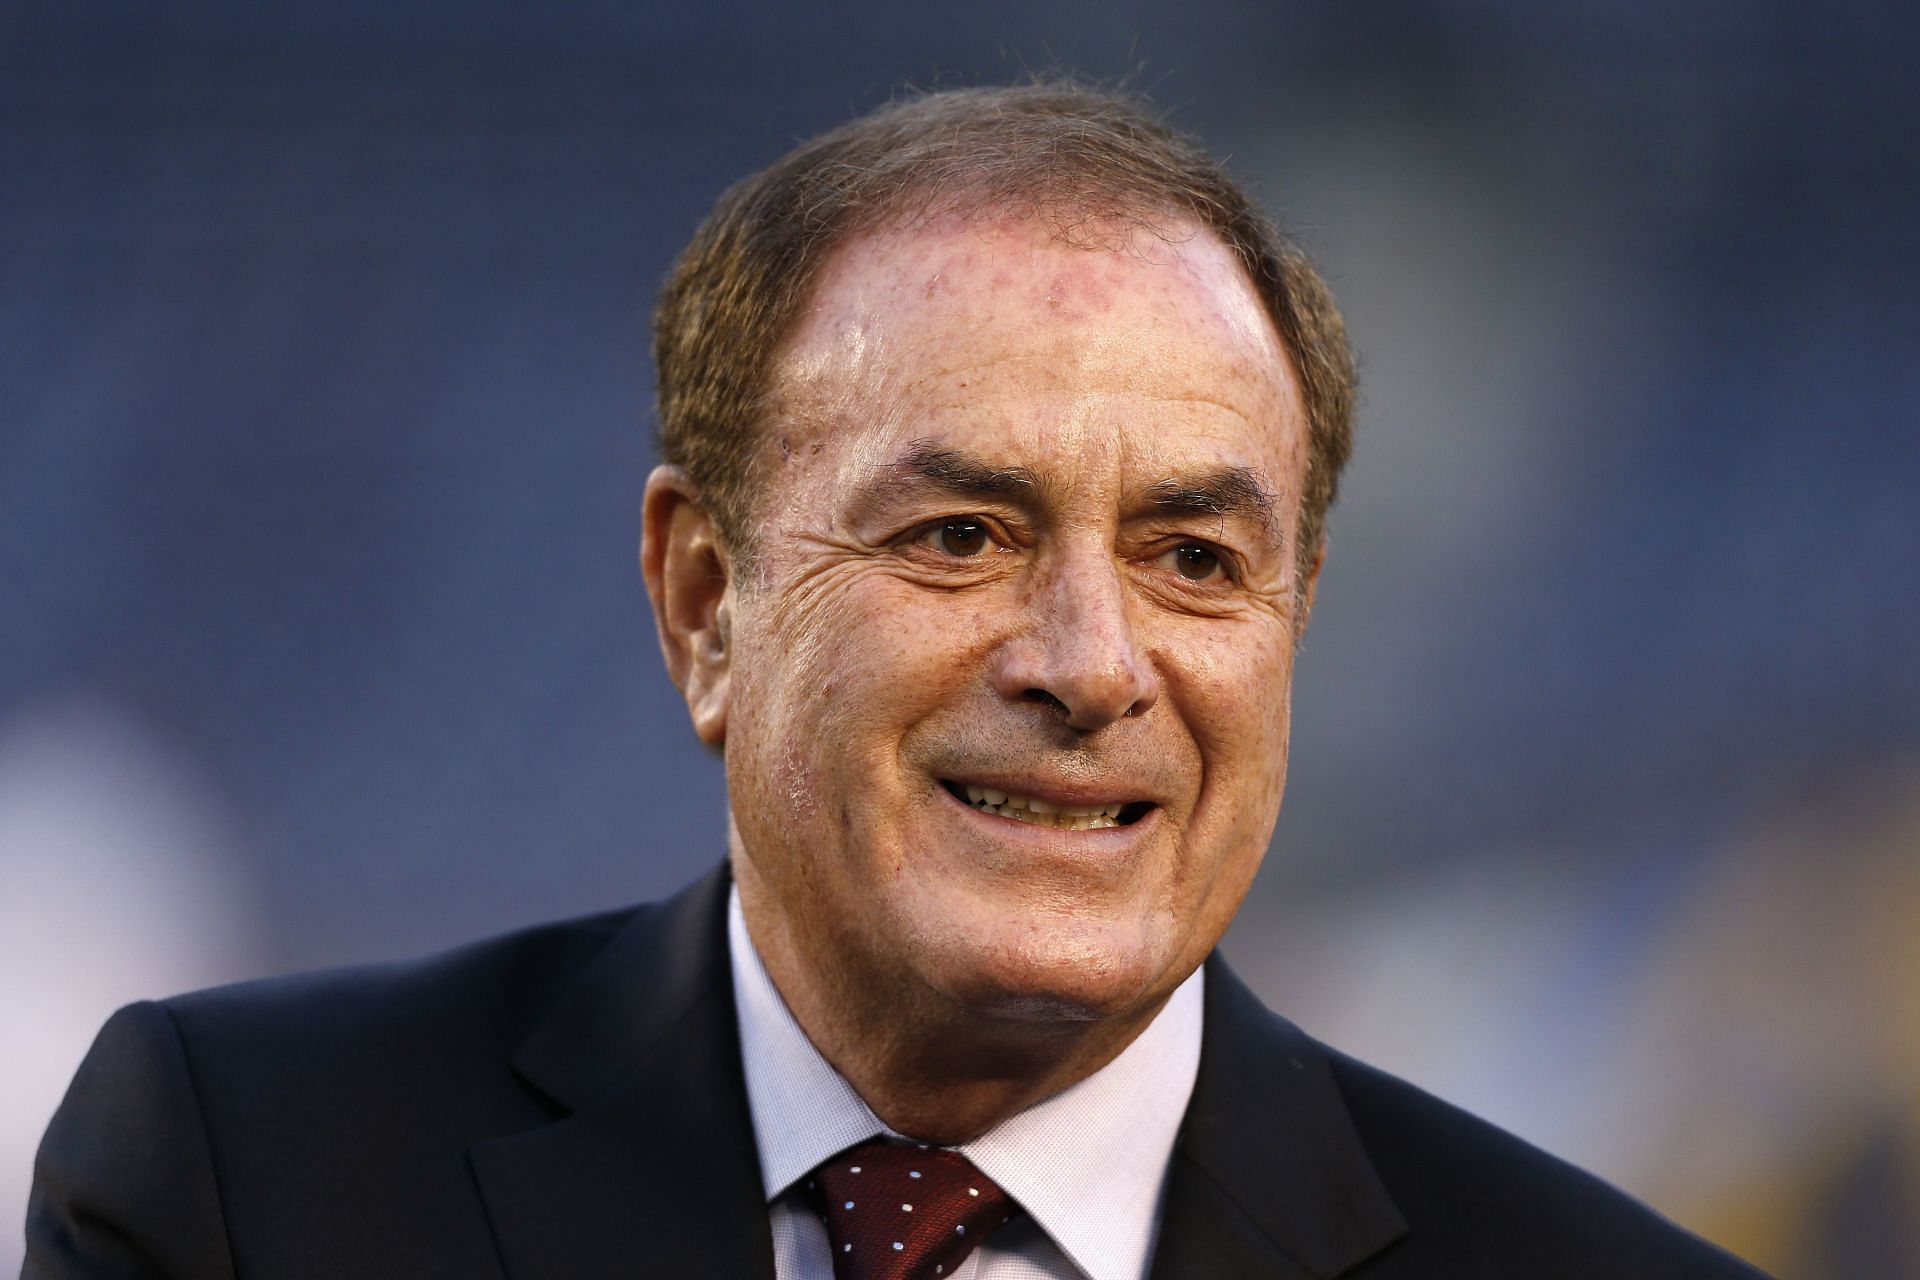 All about sports commentator Al Michaels’ Net Worth, Salary, Cars and More